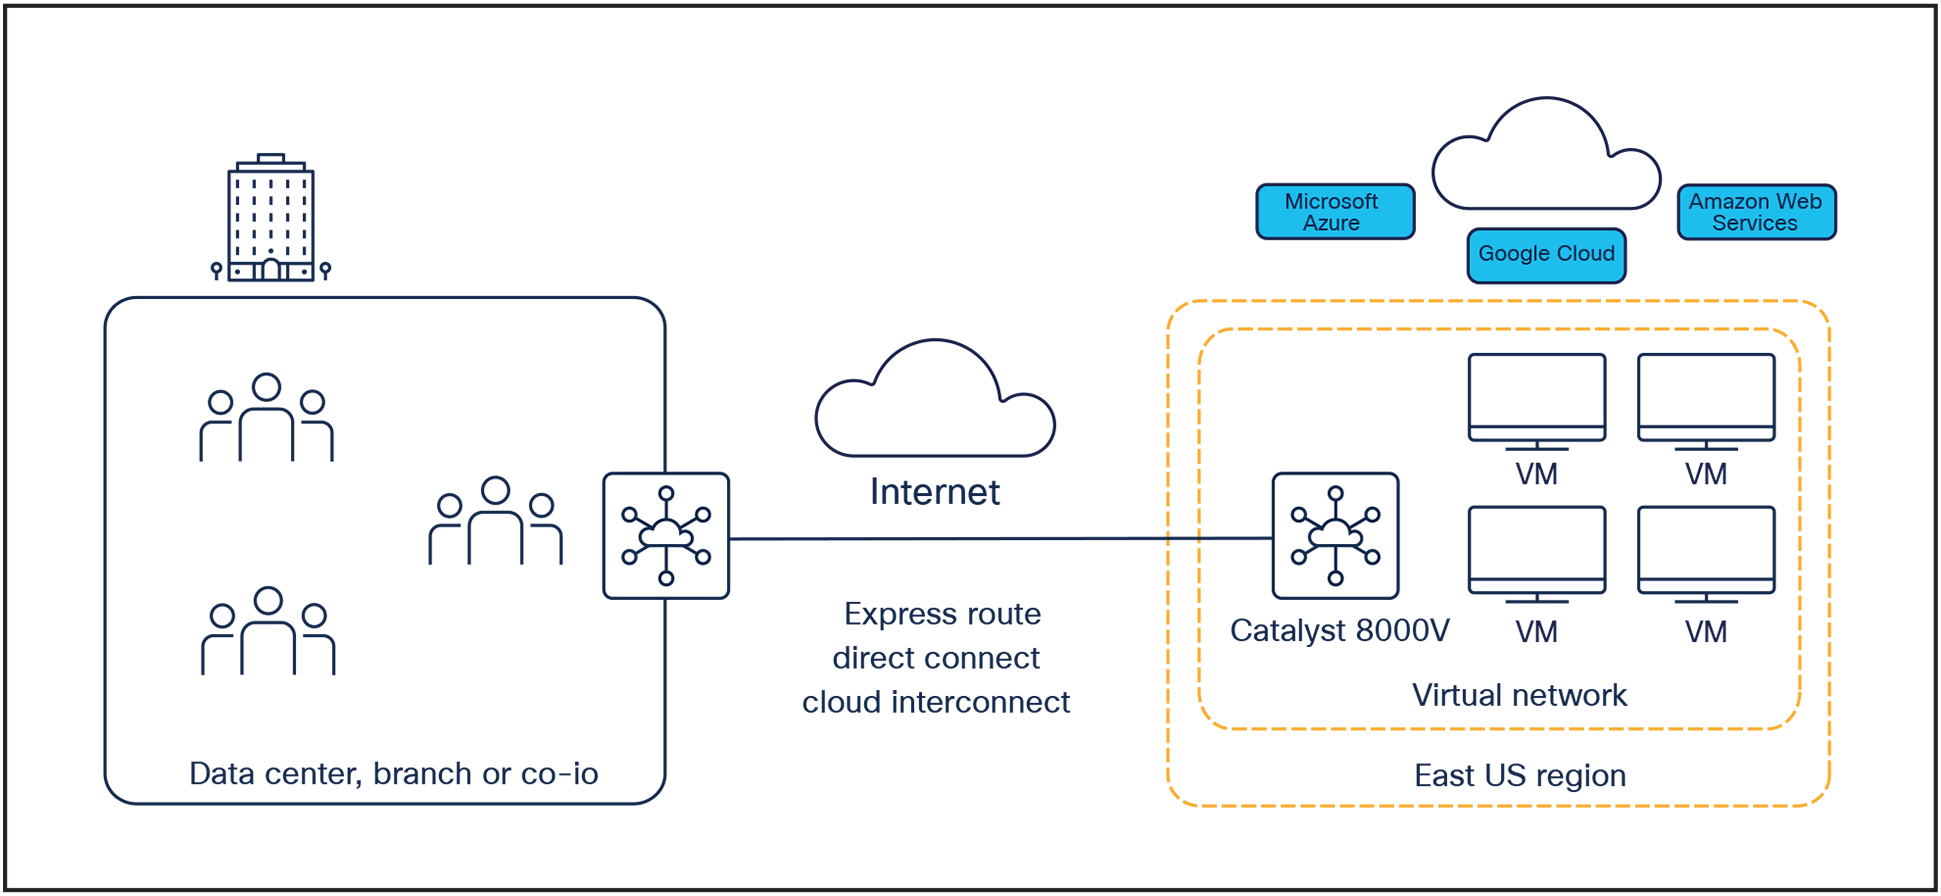 Cisco Catalyst 8000V positioned as a secure gateway in a cloud provider